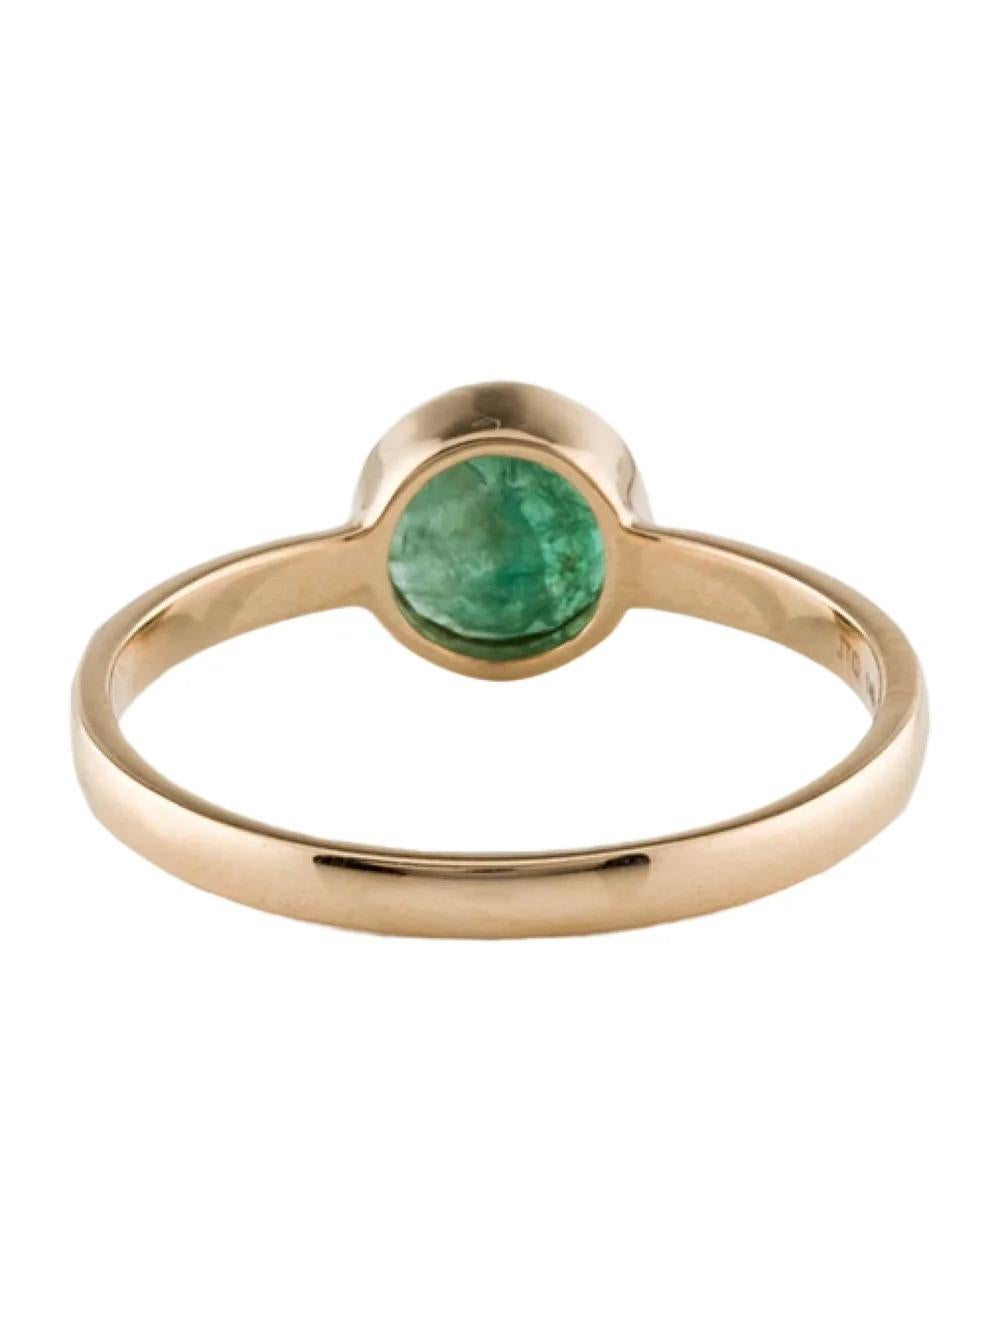 14K Emerald Cocktail Ring Size 6.75 Green Gemstone Vintage Style Fine Jewelry In New Condition For Sale In Holtsville, NY